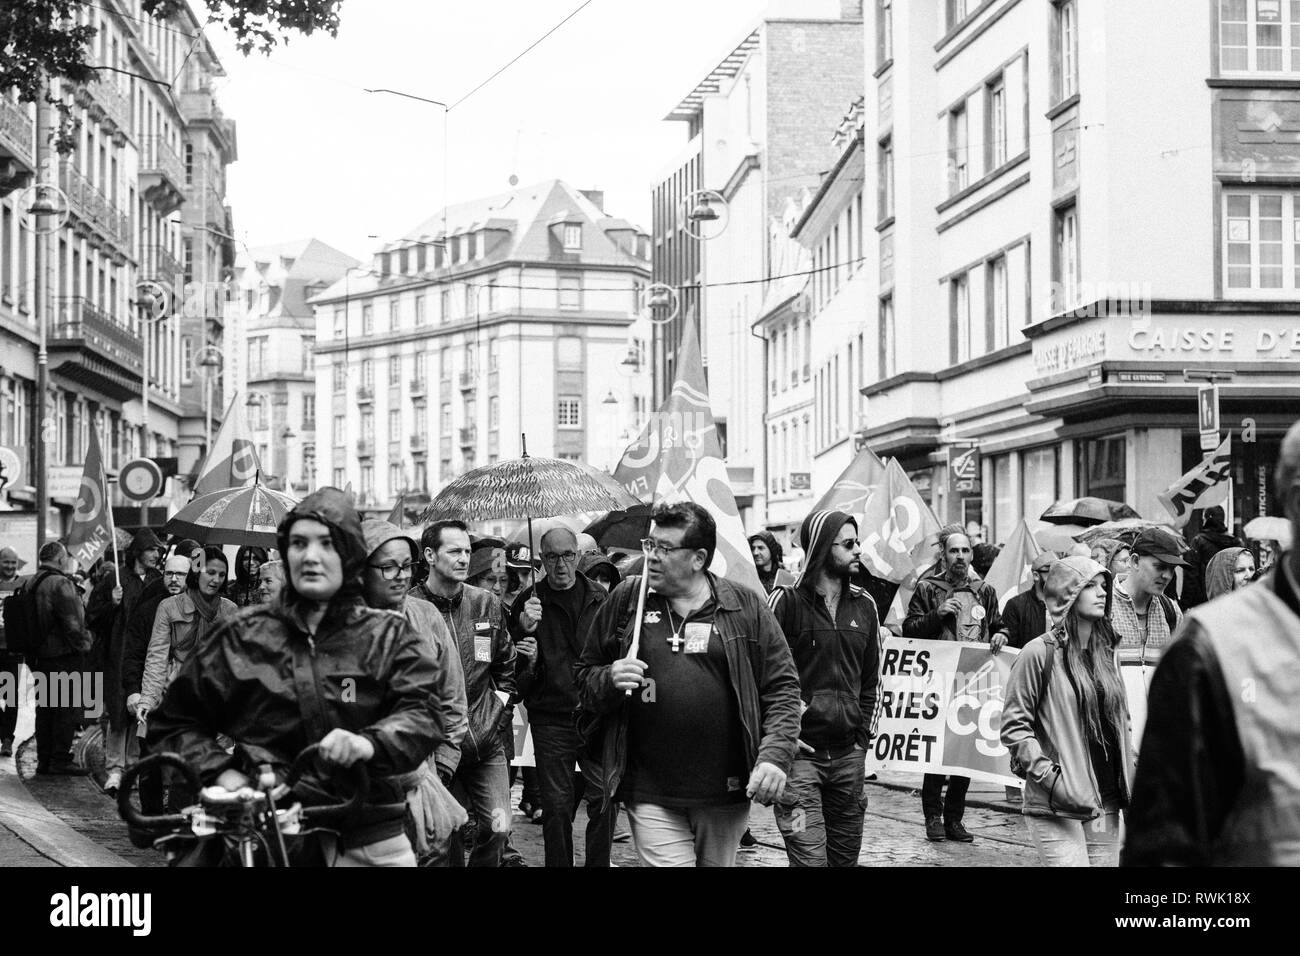 Strasbourg, France - Sep 12, 2017: Black and white of crowd political march during a French Nationwide day of protest against the labor reform proposed by Emmanuel Macron Government Stock Photo